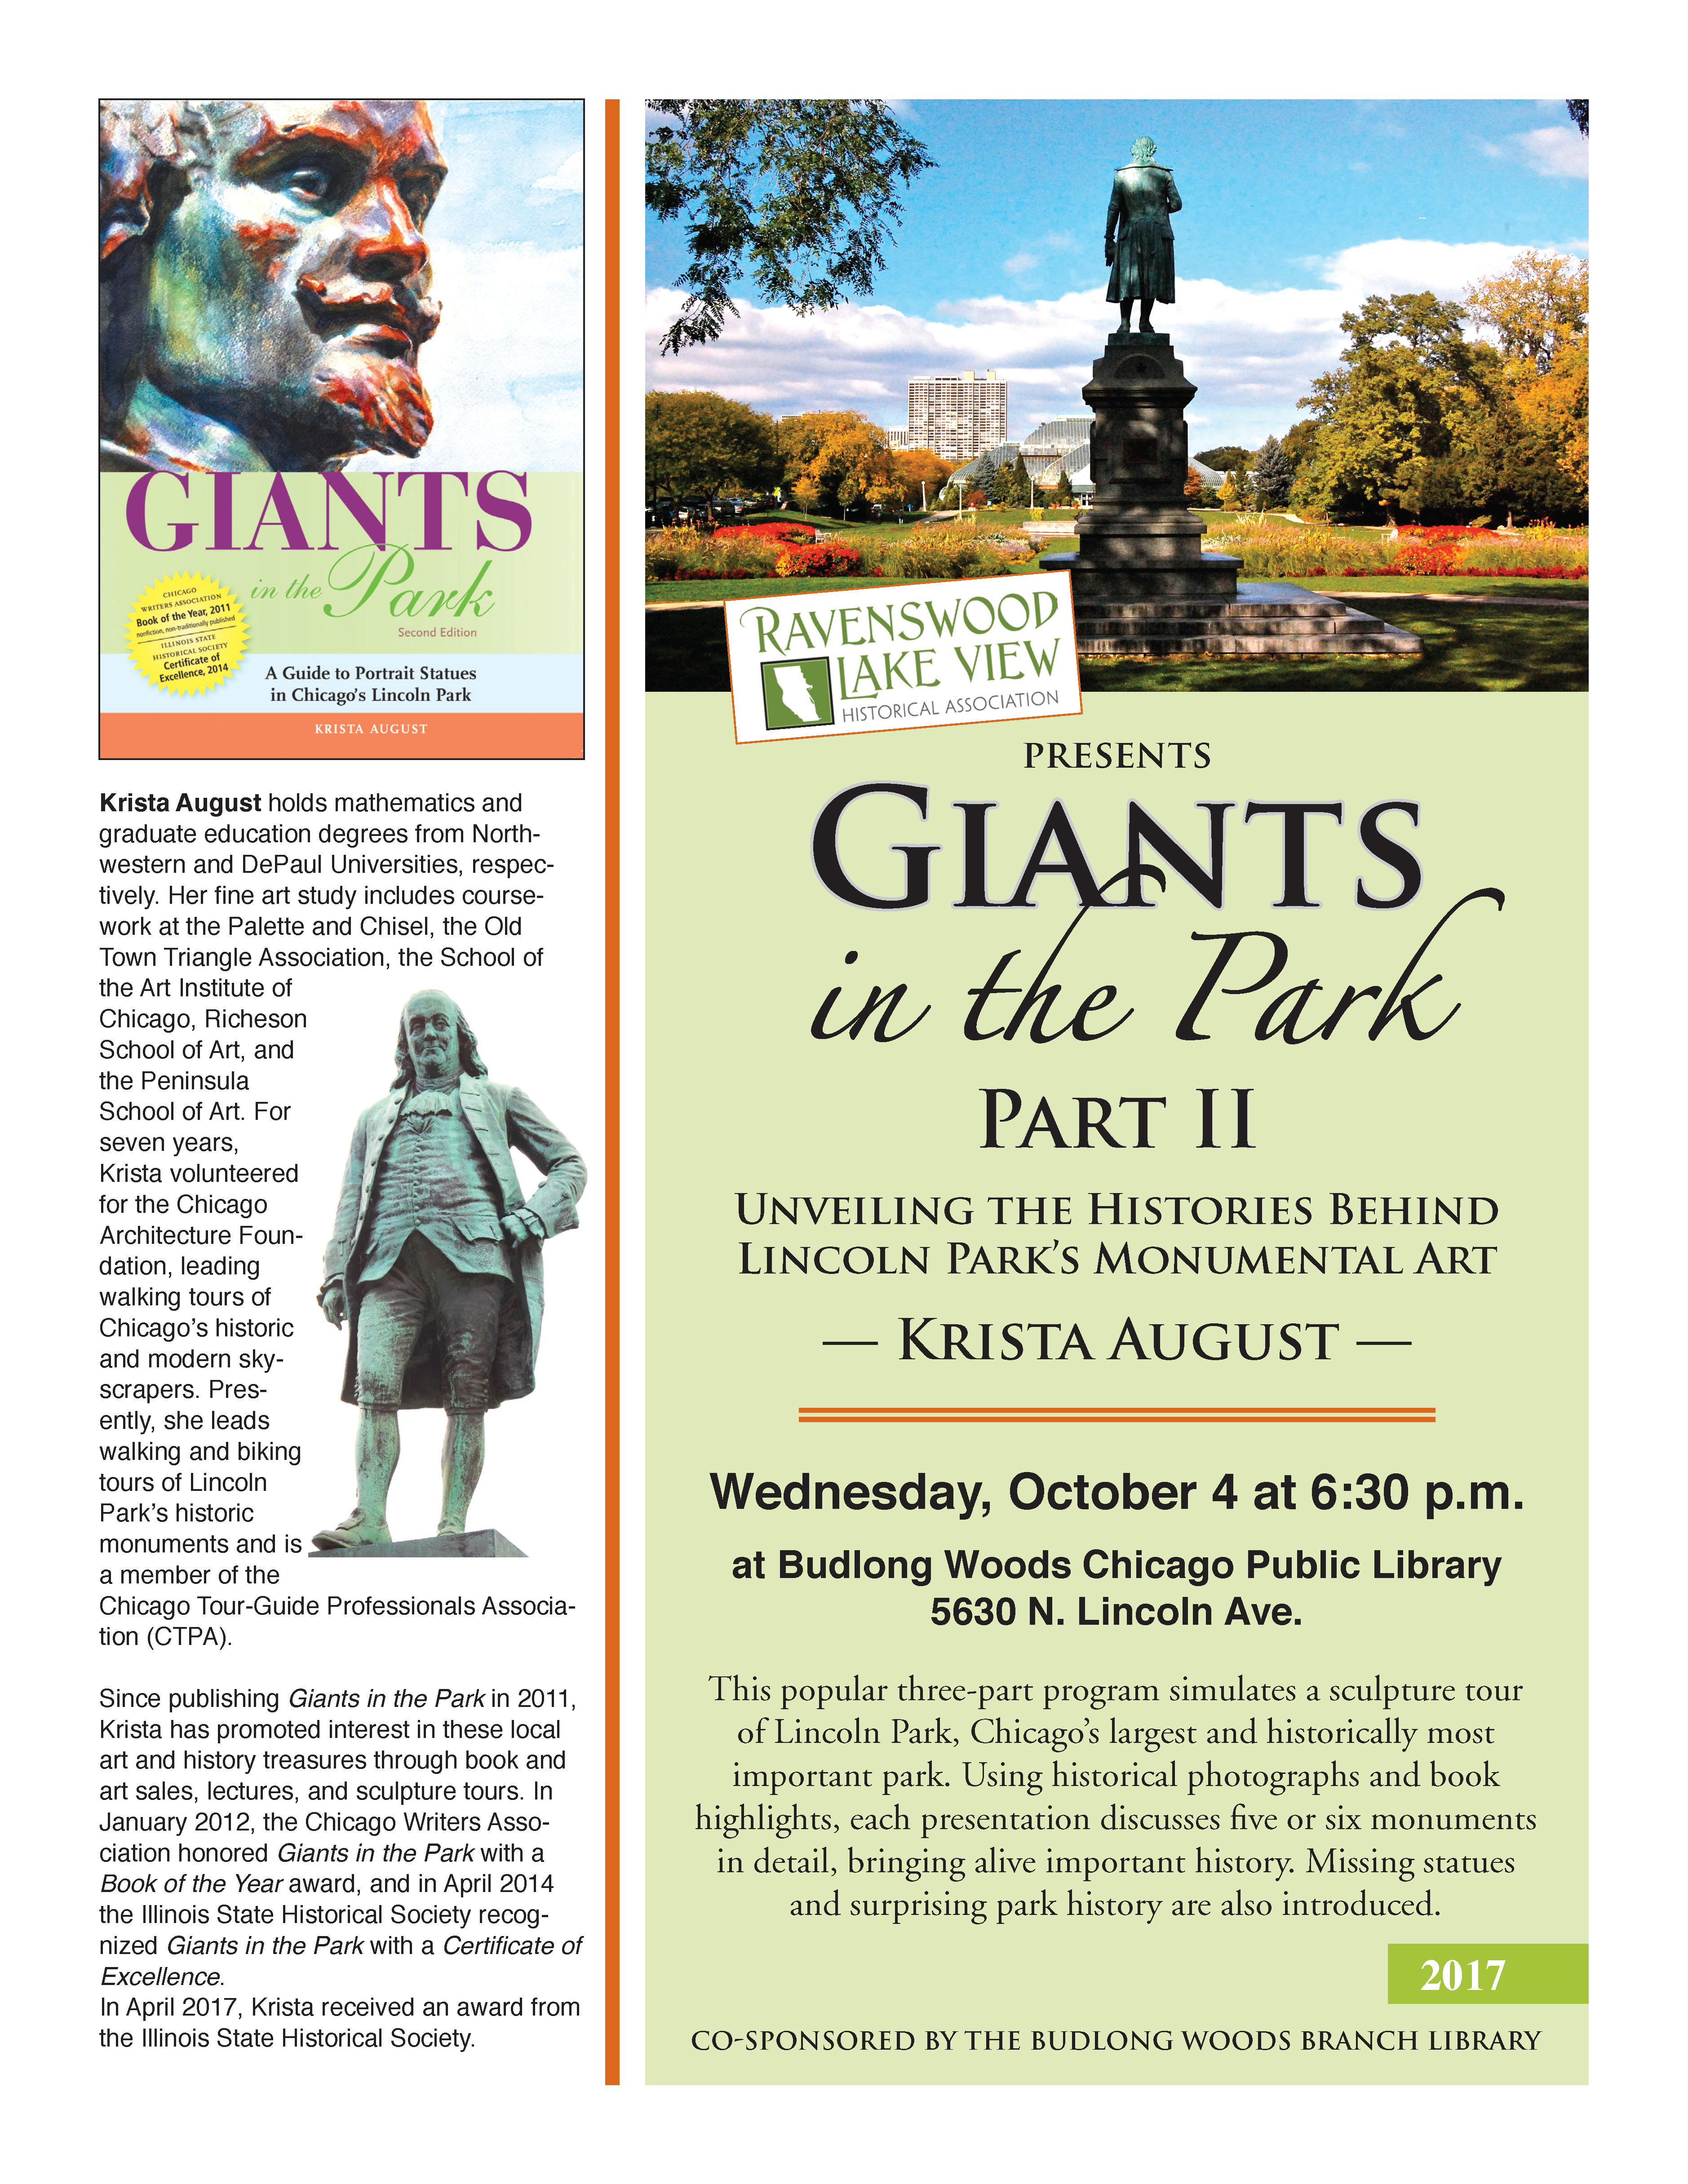 Giants in the Park Part II: Unveiling the Histories Behind Lincoln Park's Monumental Art - Krista August - Wednesday, October 4 - 6:30 pm - Budlong Woods Chicago Public Library - 5630 N. Lincoln Ave